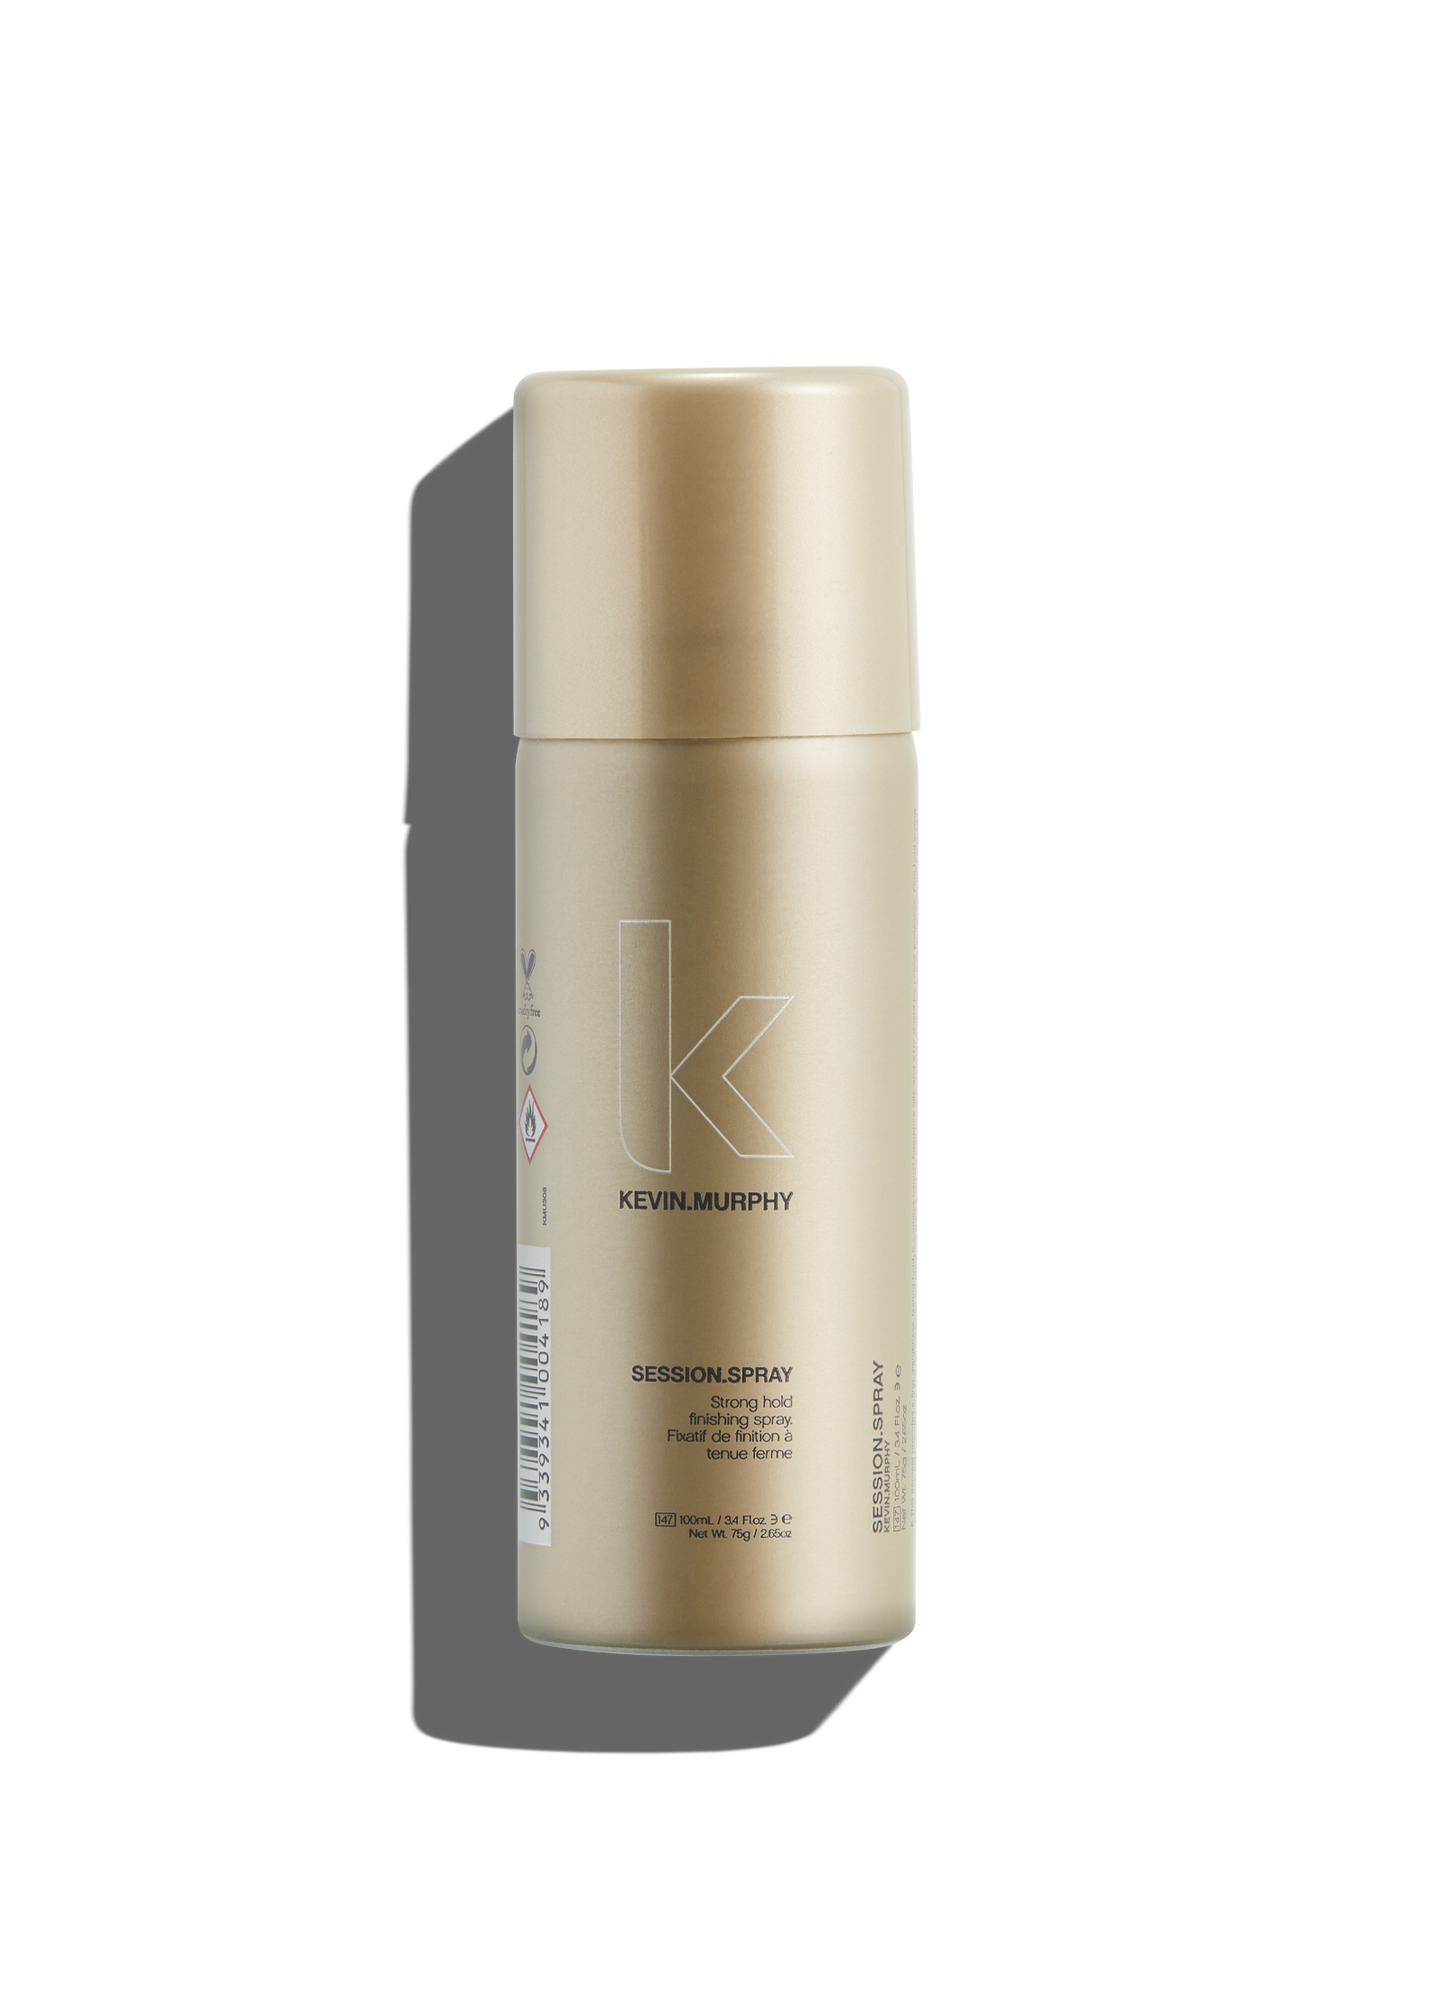 KEVIN.MURPHY SESSION.SPRAY